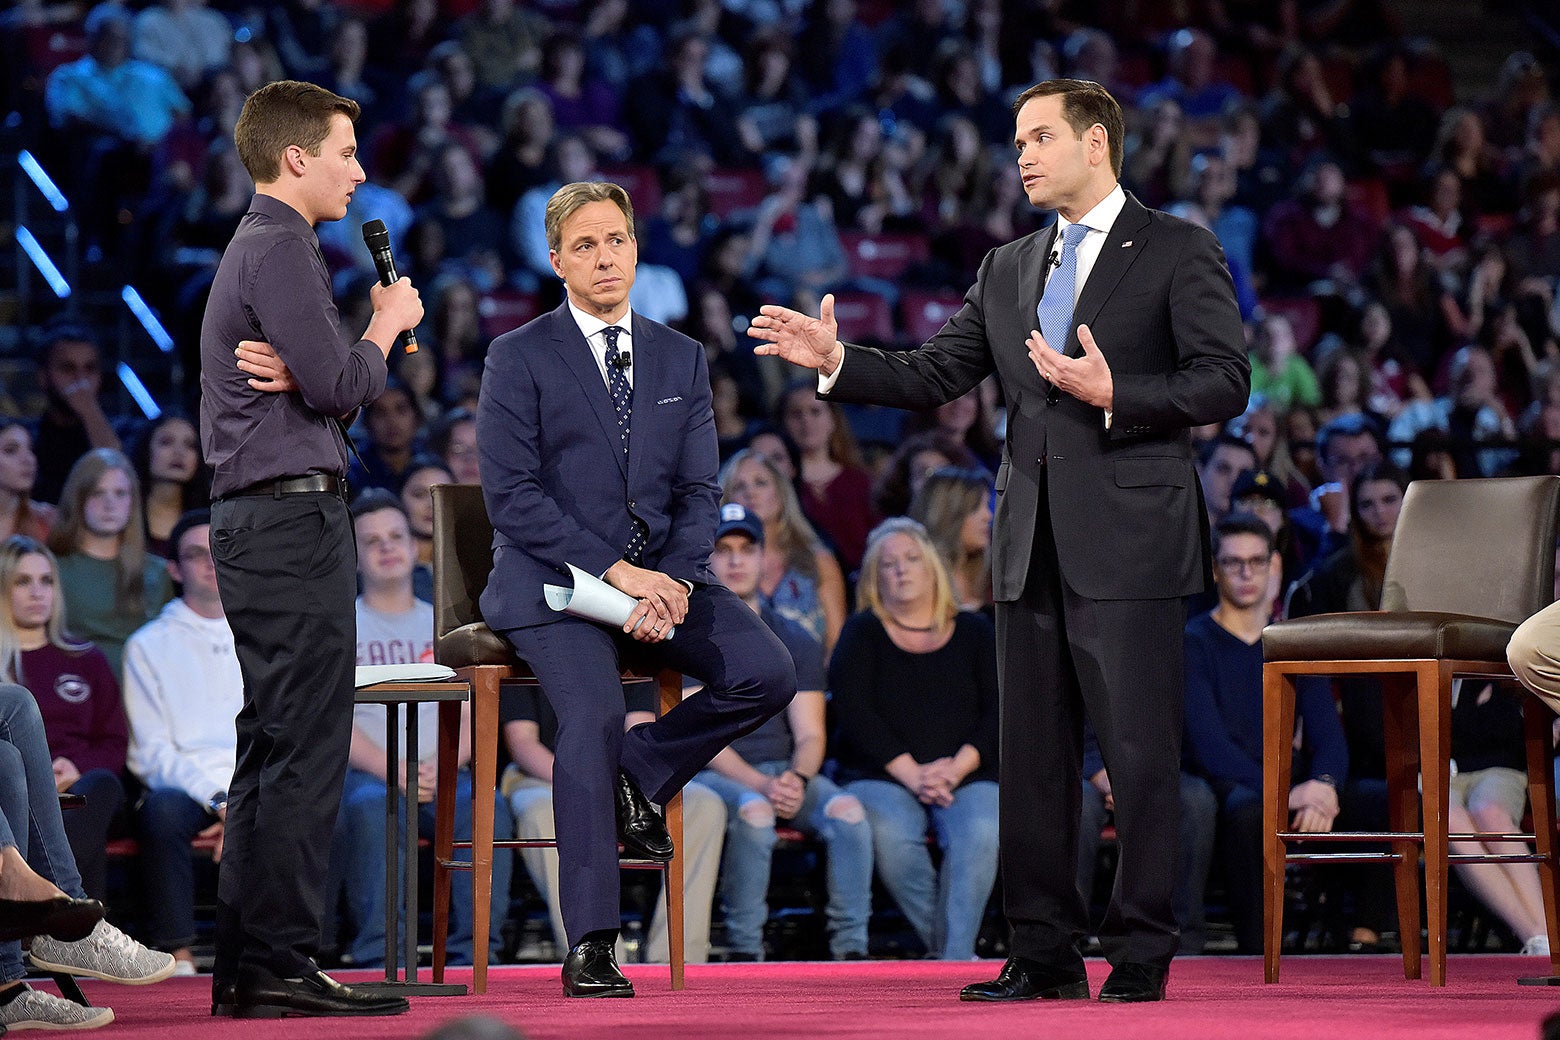 Marjory Stoneman Douglas student Cameron Kasky (L) asks Senator Marco Rubio if he will continue to accept money from the NRA during a CNN town hall meeting, at the BB&T Center, in Sunrise, Florida, U.S. February 21, 2018. 